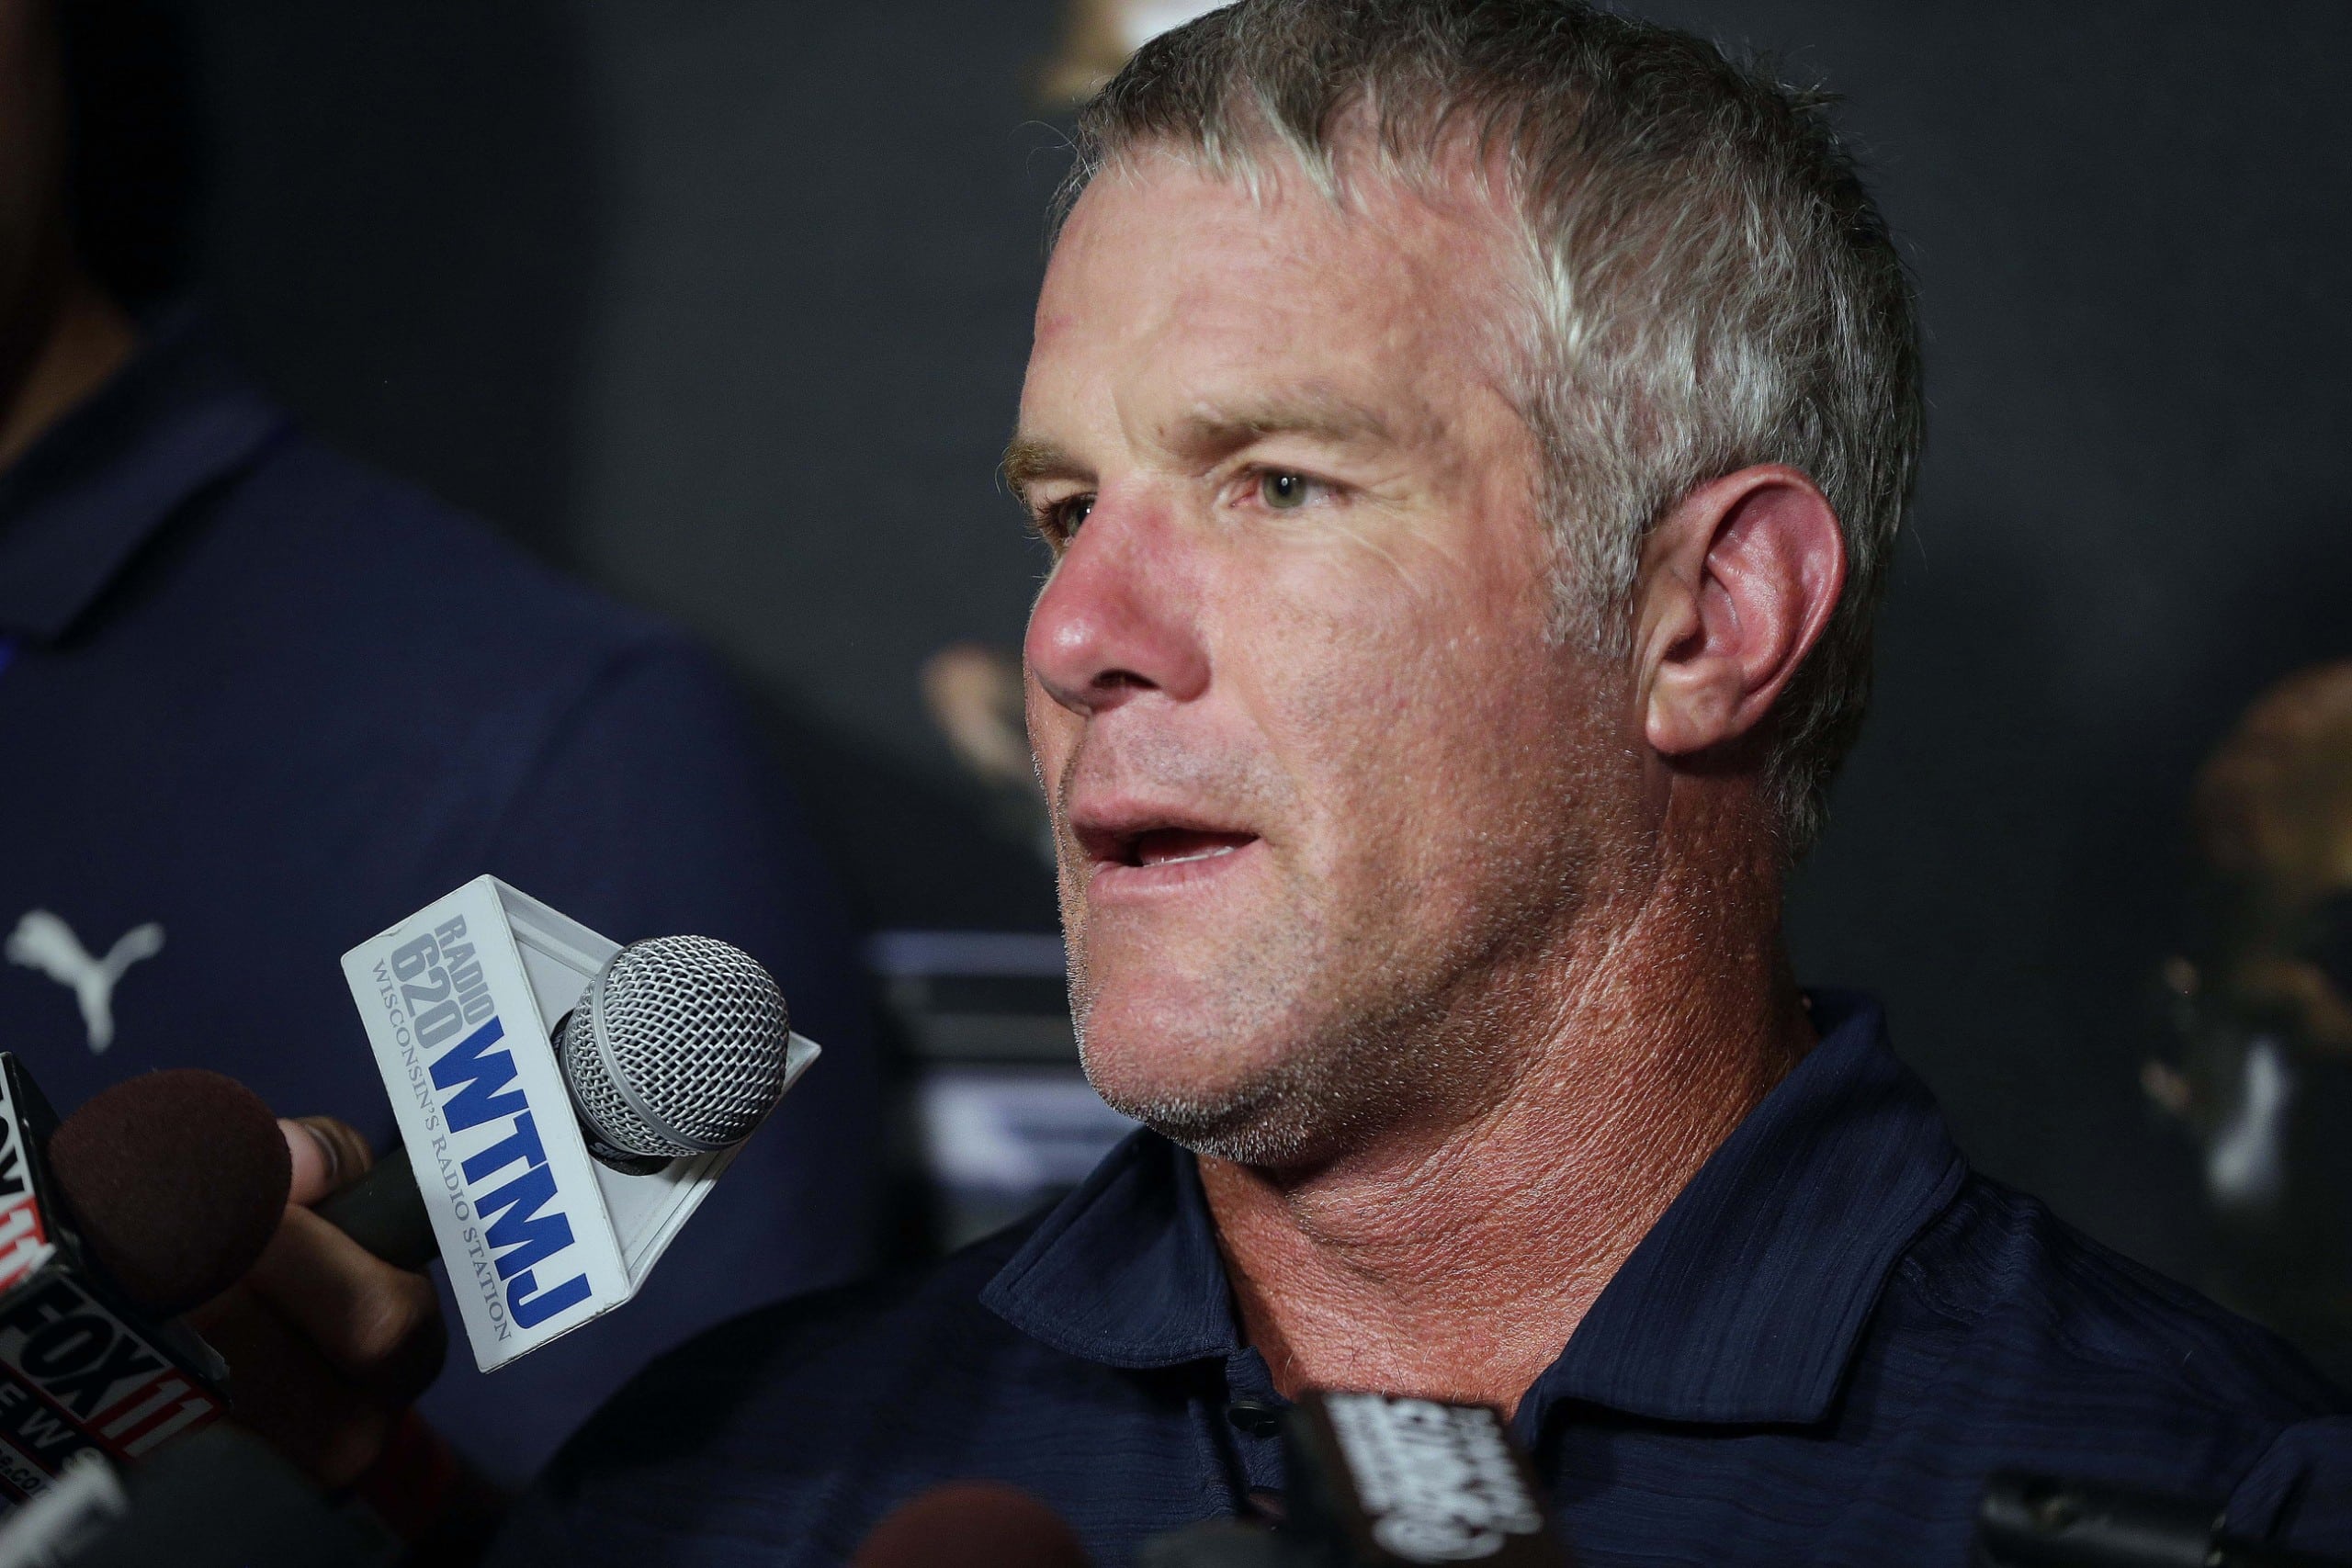 Former NFL quarterback Brett Favre answers media questions while sitting at podium